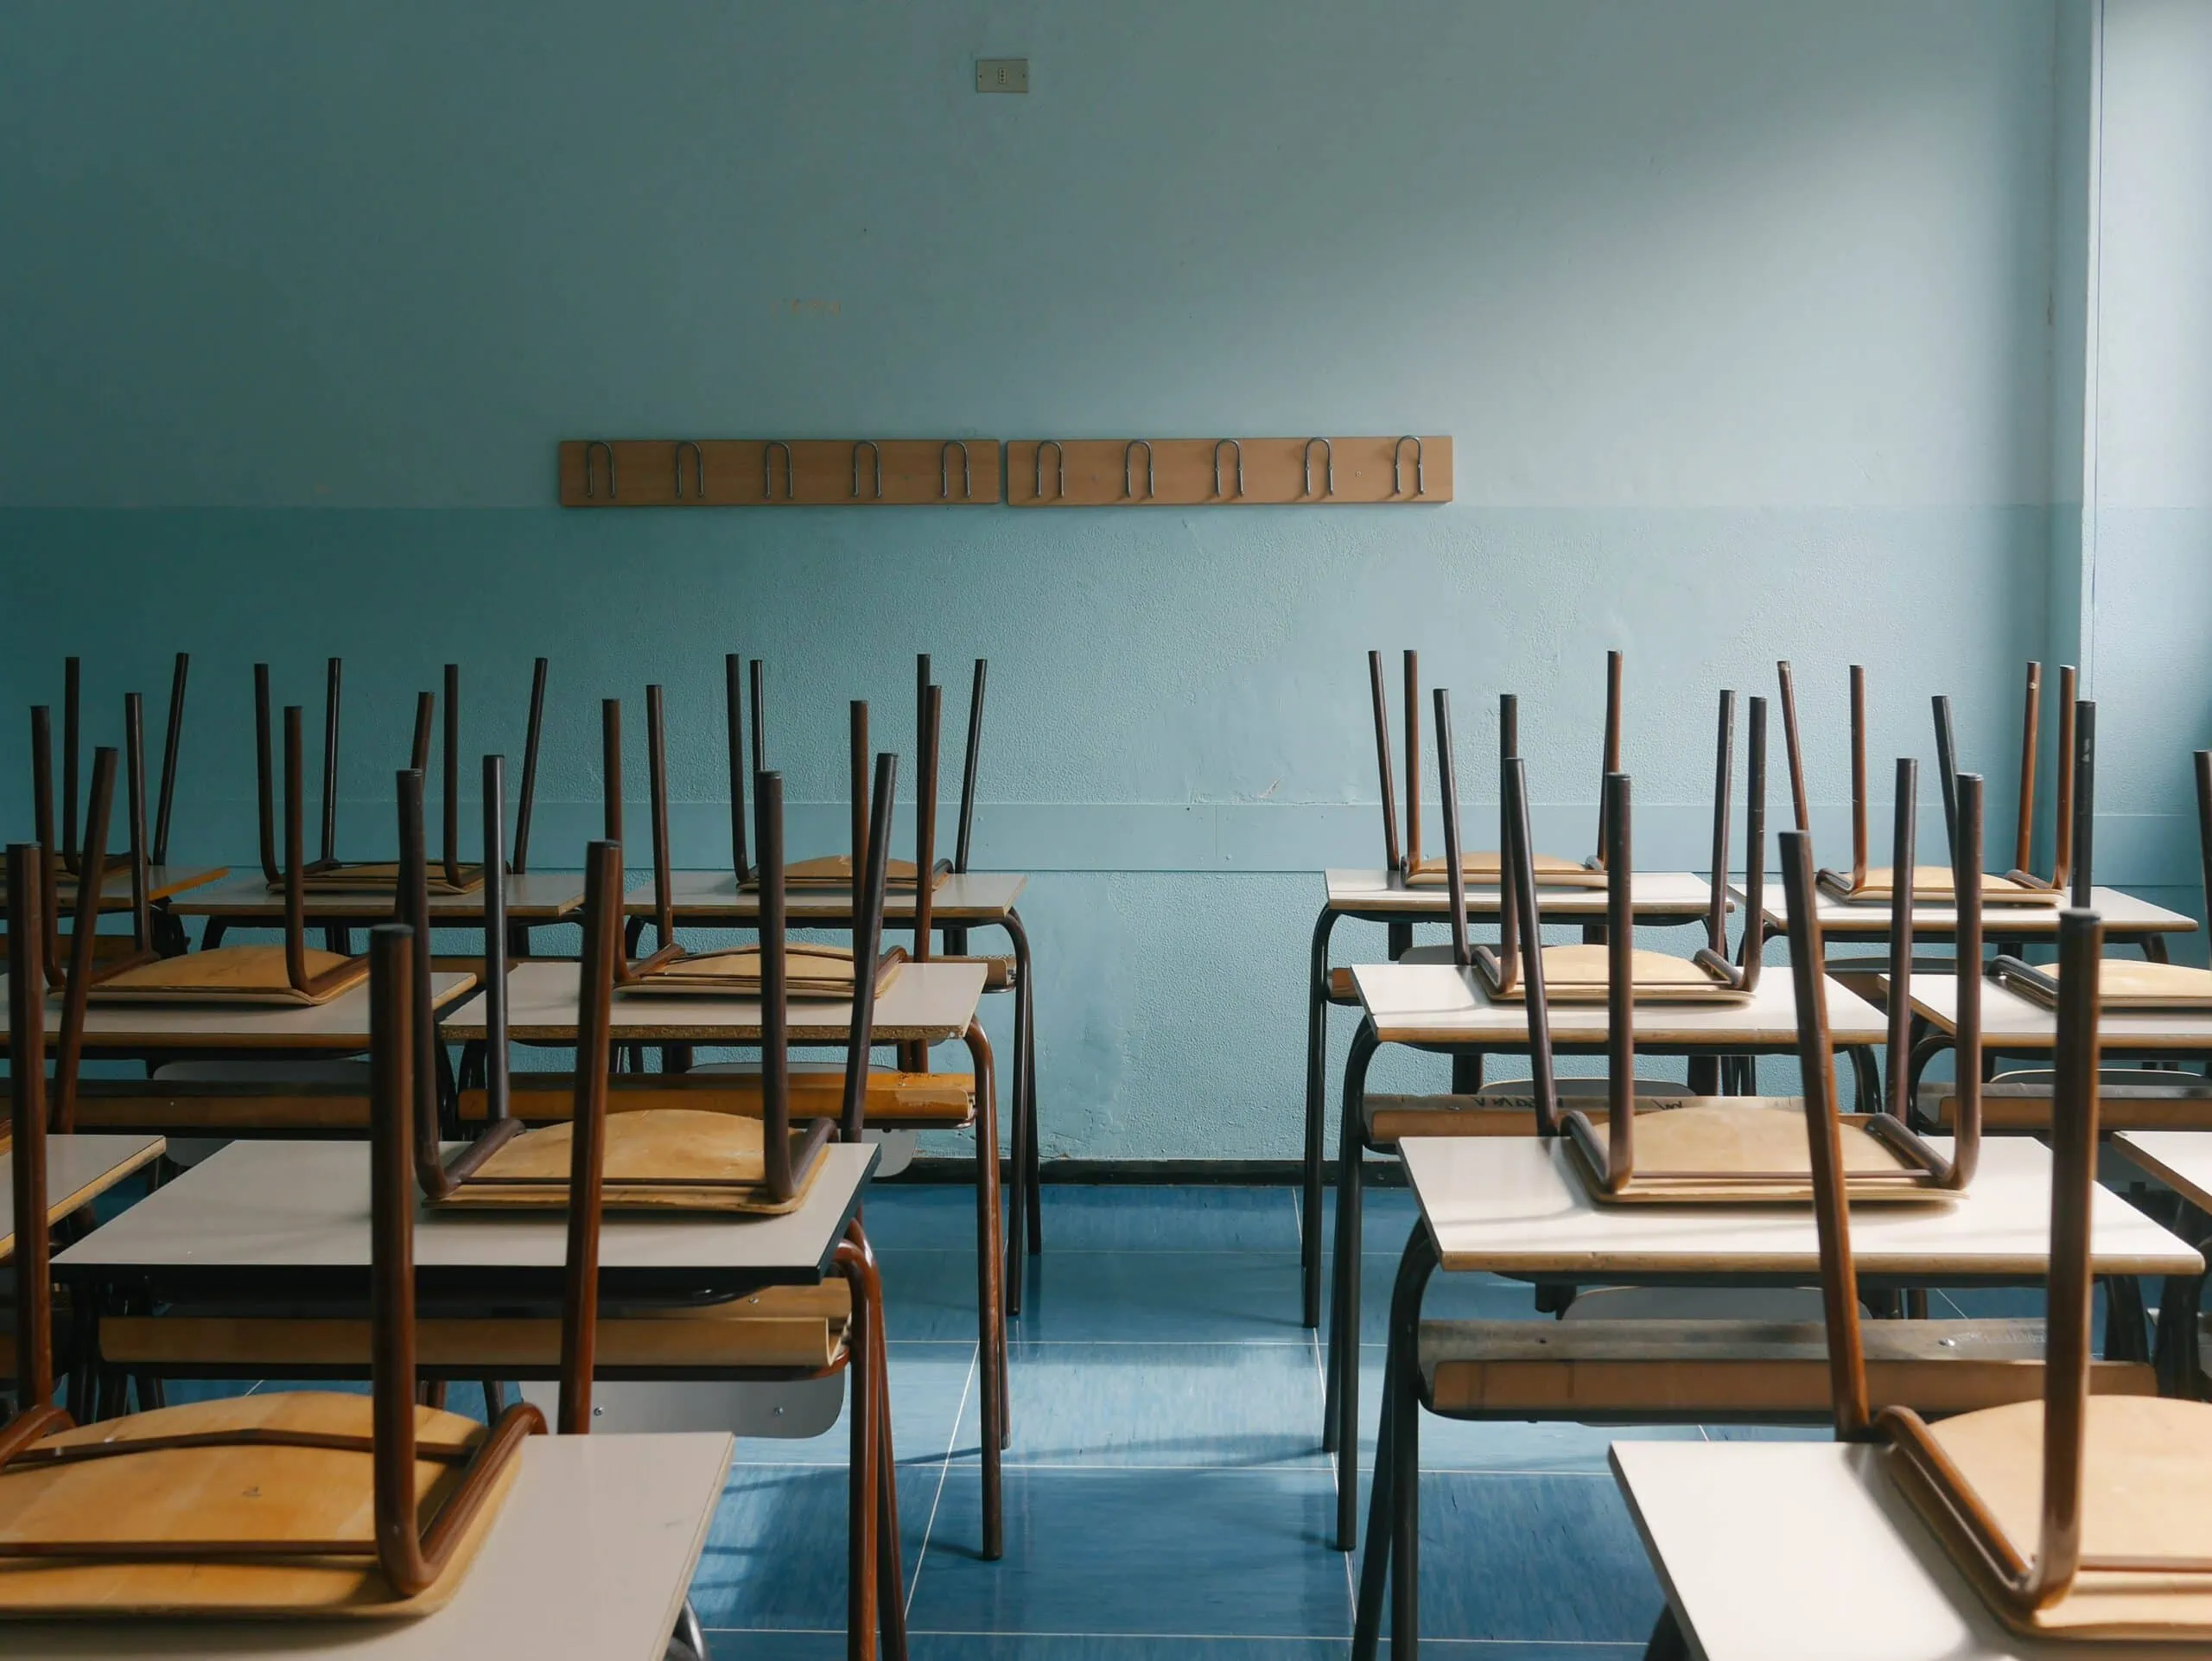 Chairs stacked on desks in classroom that detects vape with cigarette smoke detectors